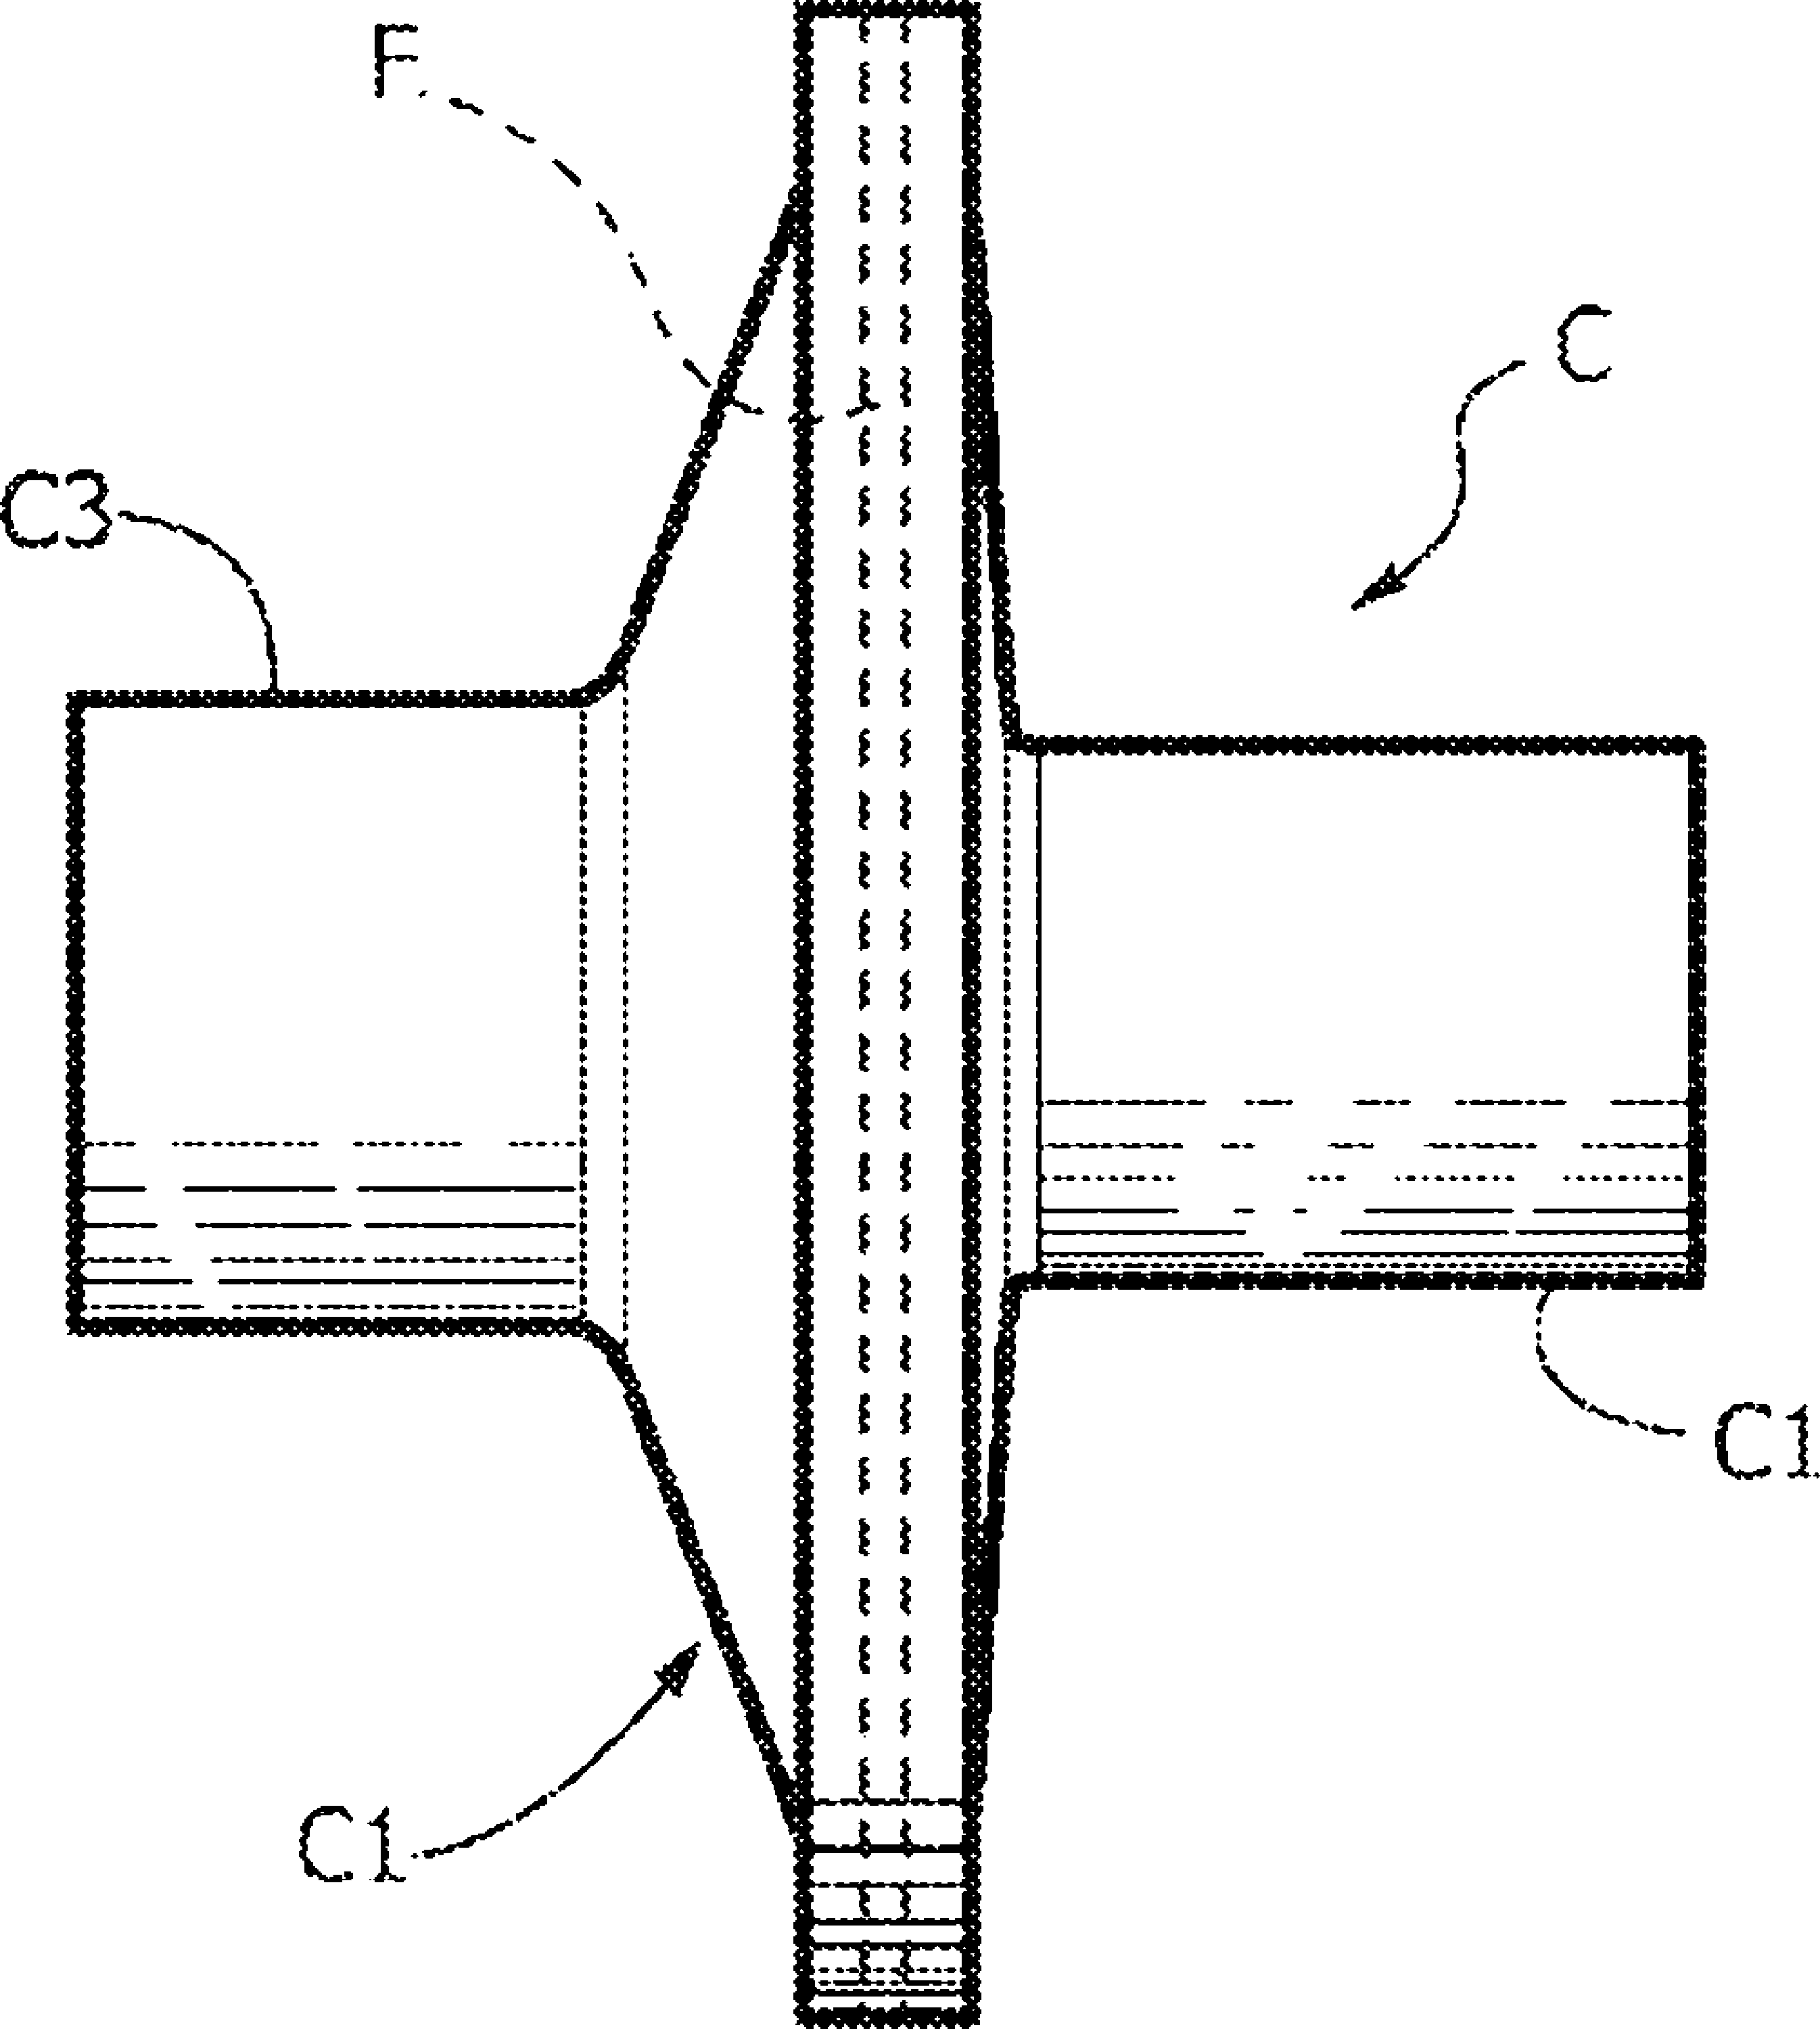 Antibacterial filter and turbine flowmeter for tests on respiratory functionality